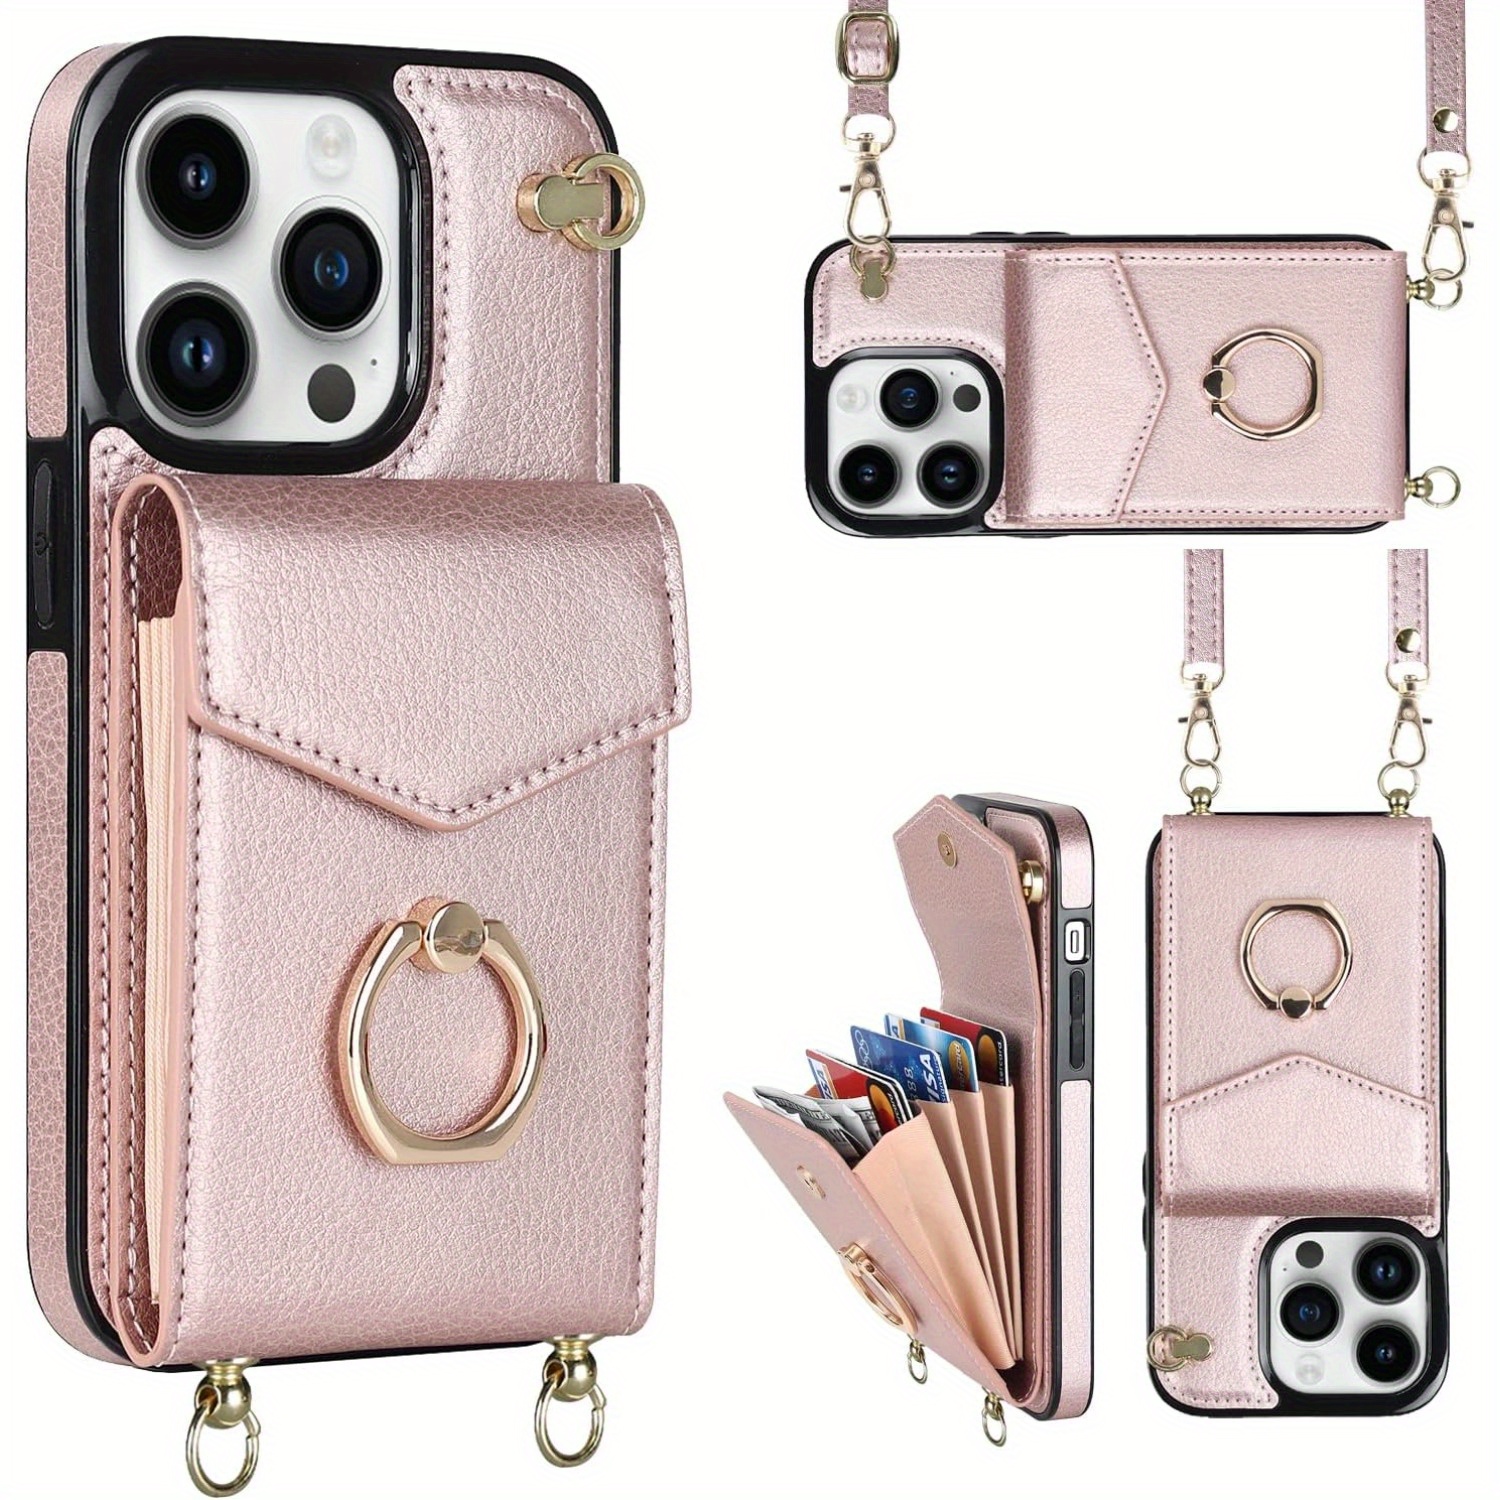 

For Iphone 12/12pro/12promax/12mini, Minimalist Wallet Case With Ring Kickstand And Shoulder Strap, Shockproof Stylish Protective Cover For Iphone